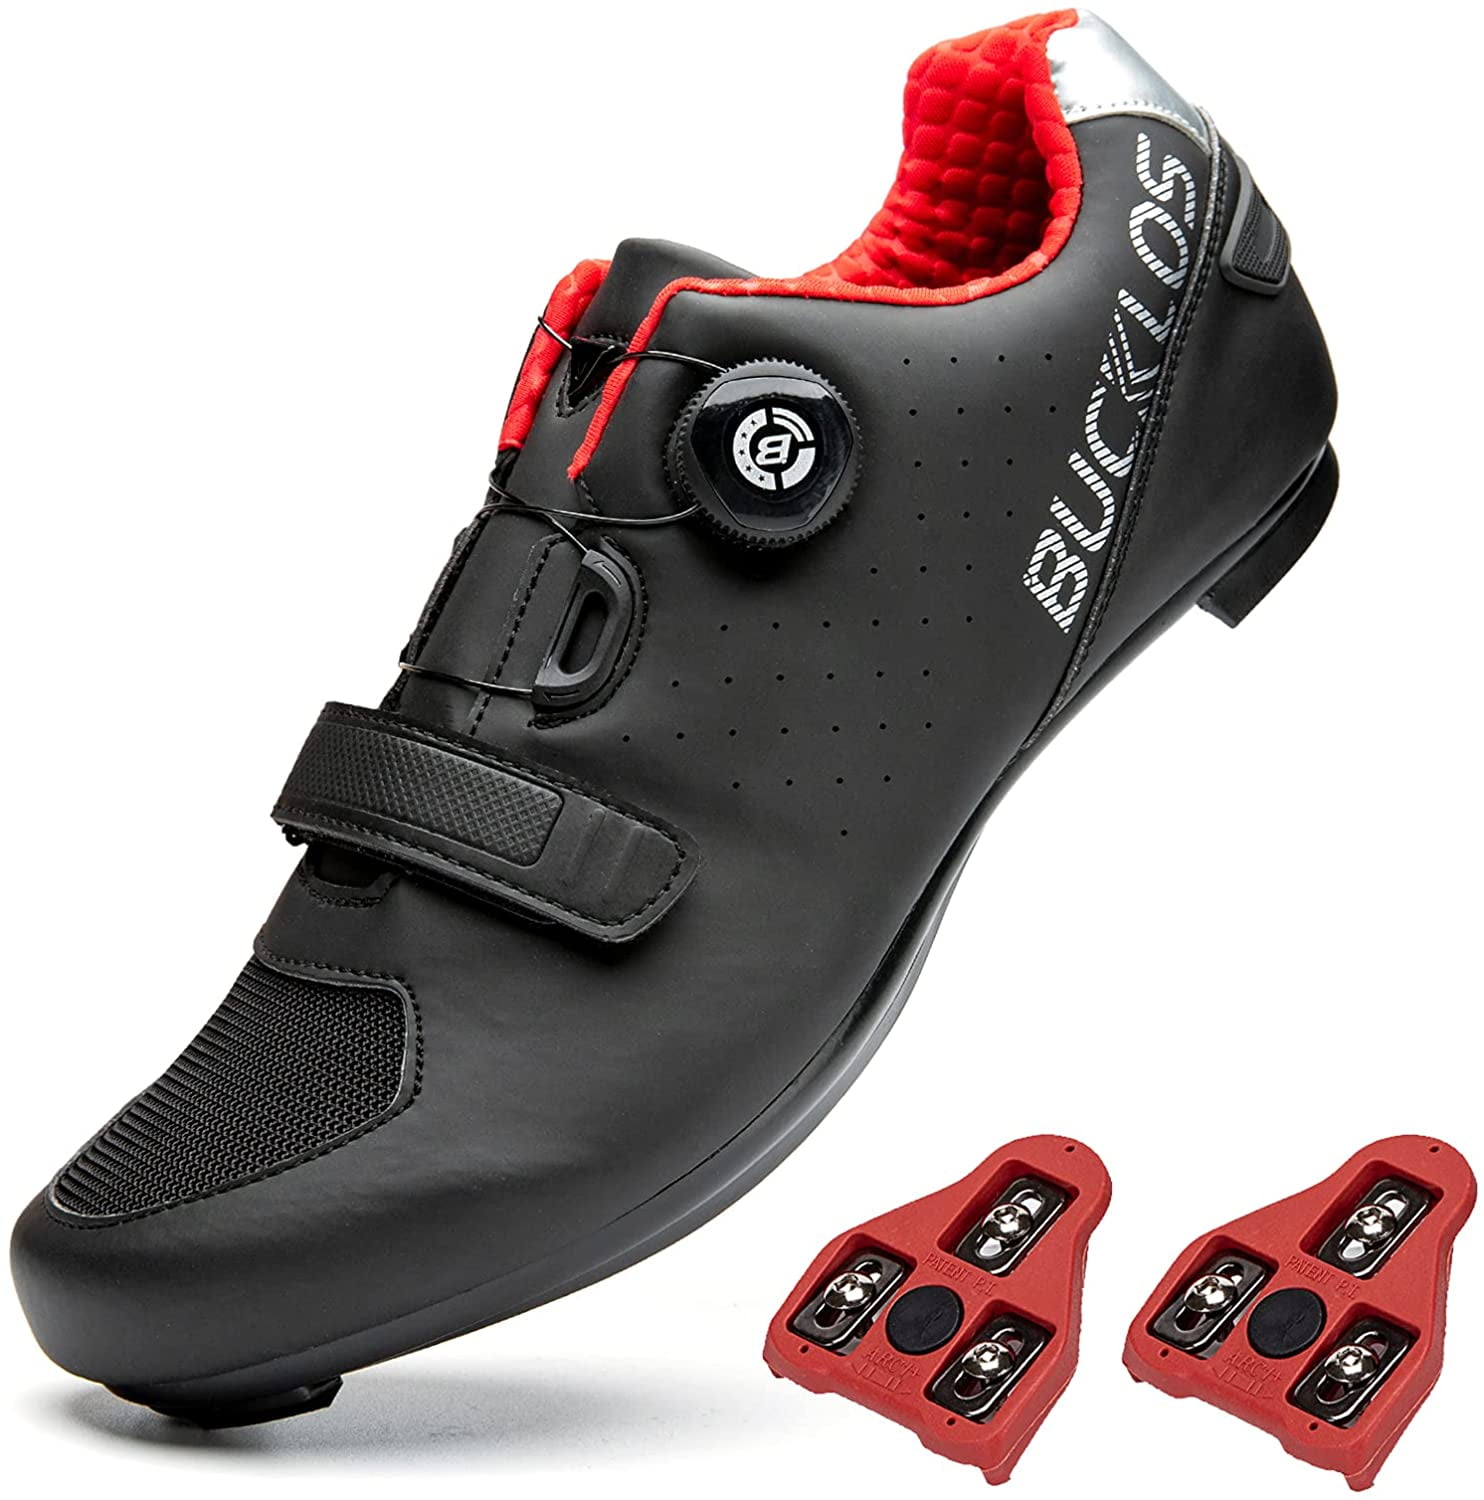 BUCKLOS Road Bike Shoes Compatible with Peloton Micro Adjustment Dial System Men Women Cycling Shoes Breathable Bicycle Sneaker for SPD Spin Shoes 